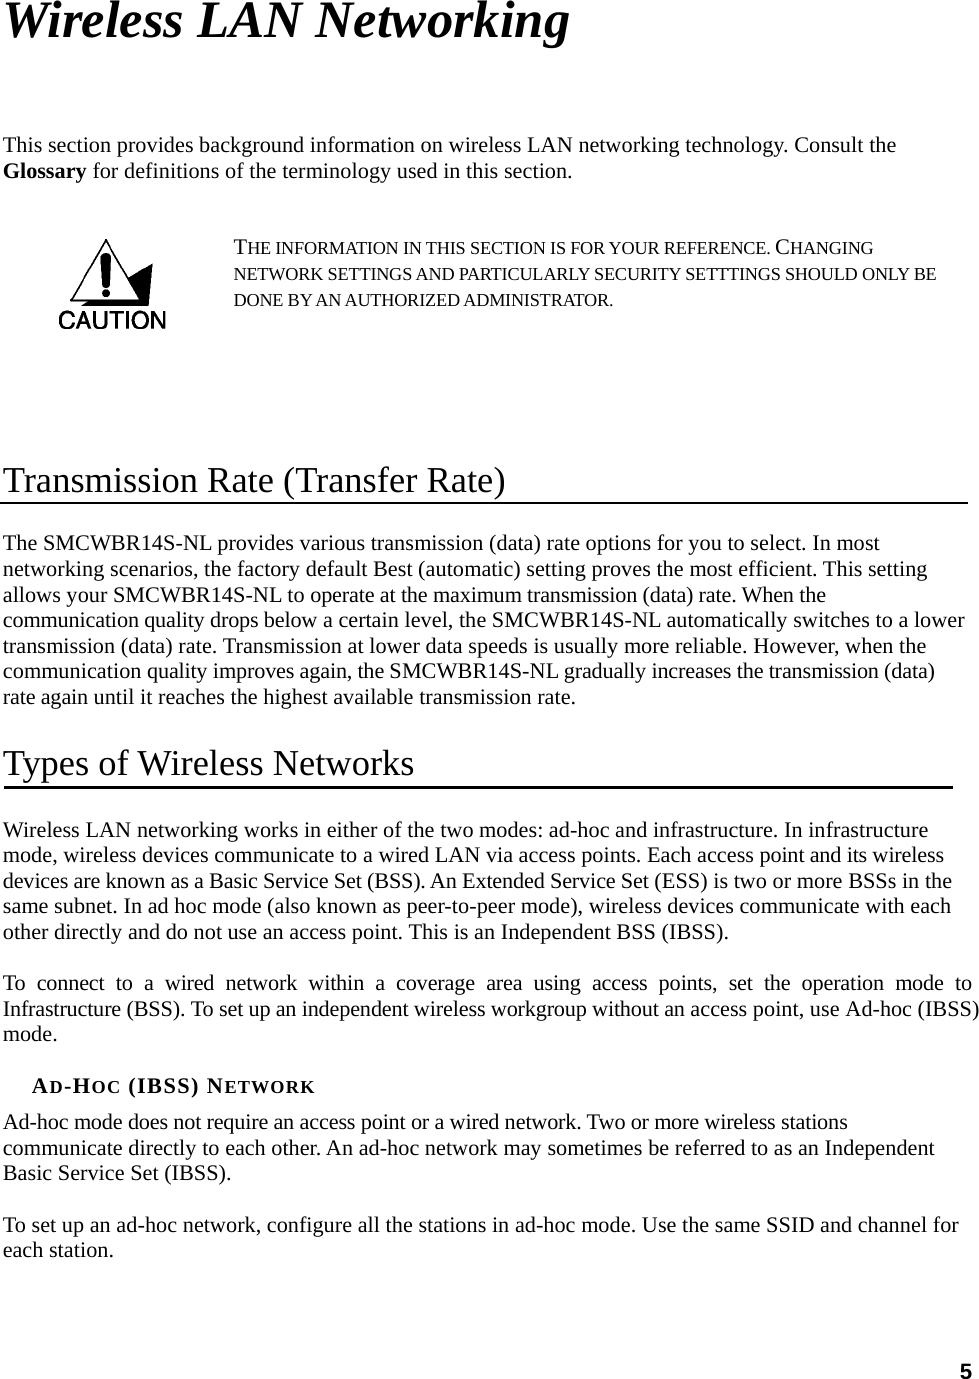  5Wireless LAN Networking This section provides background information on wireless LAN networking technology. Consult the Glossary for definitions of the terminology used in this section. THE INFORMATION IN THIS SECTION IS FOR YOUR REFERENCE. CHANGING NETWORK SETTINGS AND PARTICULARLY SECURITY SETTTINGS SHOULD ONLY BE DONE BY AN AUTHORIZED ADMINISTRATOR.   Transmission Rate (Transfer Rate) The SMCWBR14S-NL provides various transmission (data) rate options for you to select. In most networking scenarios, the factory default Best (automatic) setting proves the most efficient. This setting allows your SMCWBR14S-NL to operate at the maximum transmission (data) rate. When the communication quality drops below a certain level, the SMCWBR14S-NL automatically switches to a lower transmission (data) rate. Transmission at lower data speeds is usually more reliable. However, when the communication quality improves again, the SMCWBR14S-NL gradually increases the transmission (data) rate again until it reaches the highest available transmission rate. Types of Wireless Networks Wireless LAN networking works in either of the two modes: ad-hoc and infrastructure. In infrastructure mode, wireless devices communicate to a wired LAN via access points. Each access point and its wireless devices are known as a Basic Service Set (BSS). An Extended Service Set (ESS) is two or more BSSs in the same subnet. In ad hoc mode (also known as peer-to-peer mode), wireless devices communicate with each other directly and do not use an access point. This is an Independent BSS (IBSS).  To connect to a wired network within a coverage area using access points, set the operation mode to Infrastructure (BSS). To set up an independent wireless workgroup without an access point, use Ad-hoc (IBSS) mode.  AD-HOC (IBSS) NETWORK Ad-hoc mode does not require an access point or a wired network. Two or more wireless stations communicate directly to each other. An ad-hoc network may sometimes be referred to as an Independent Basic Service Set (IBSS).  To set up an ad-hoc network, configure all the stations in ad-hoc mode. Use the same SSID and channel for each station.  